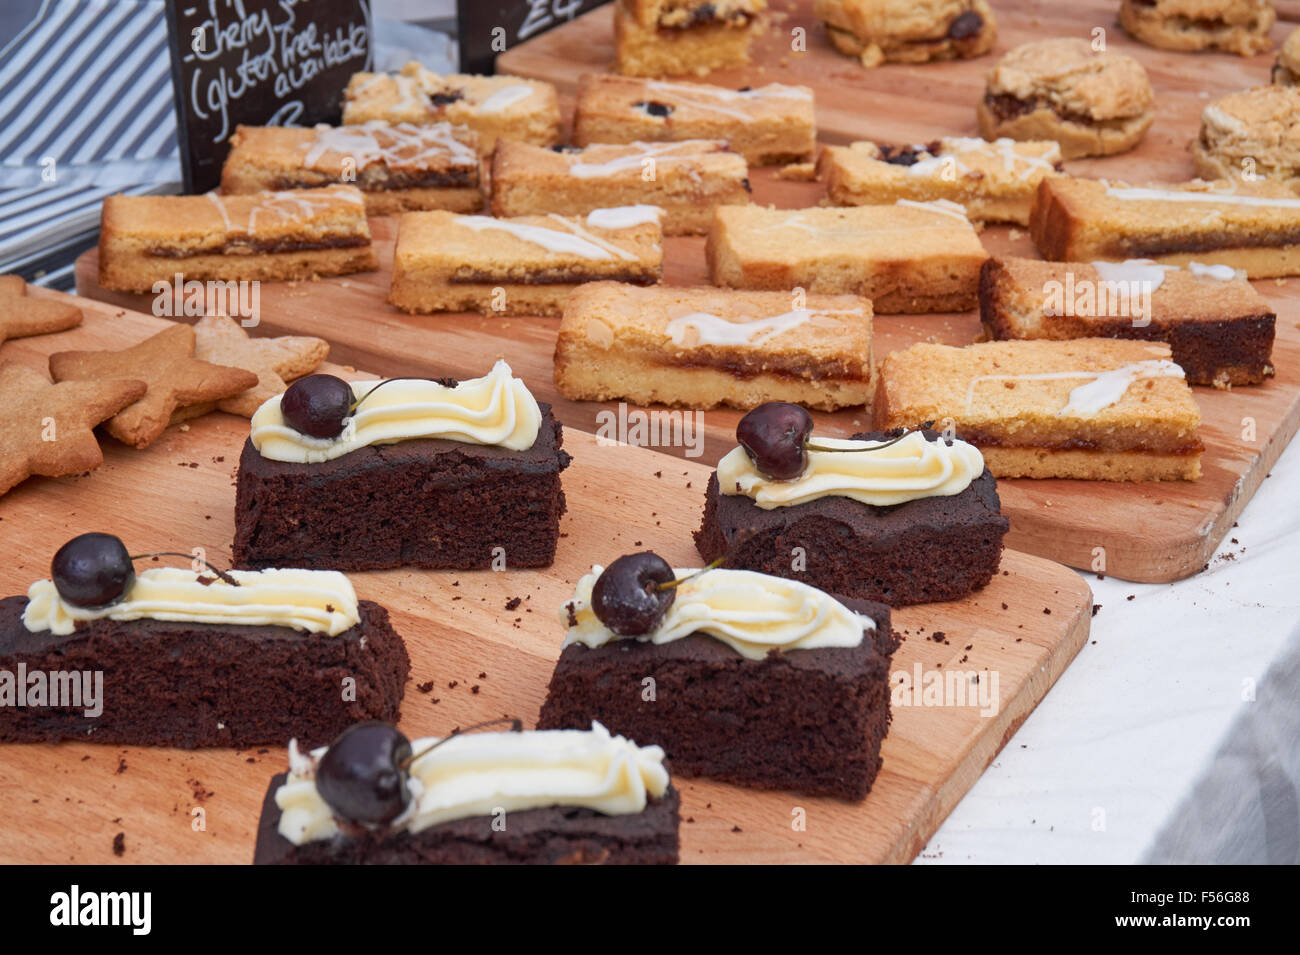 Italian Artisan Bakery with Its Wonderful Cakes and Pastries Stock Photo -  Image of chocolate, sales: 87828796